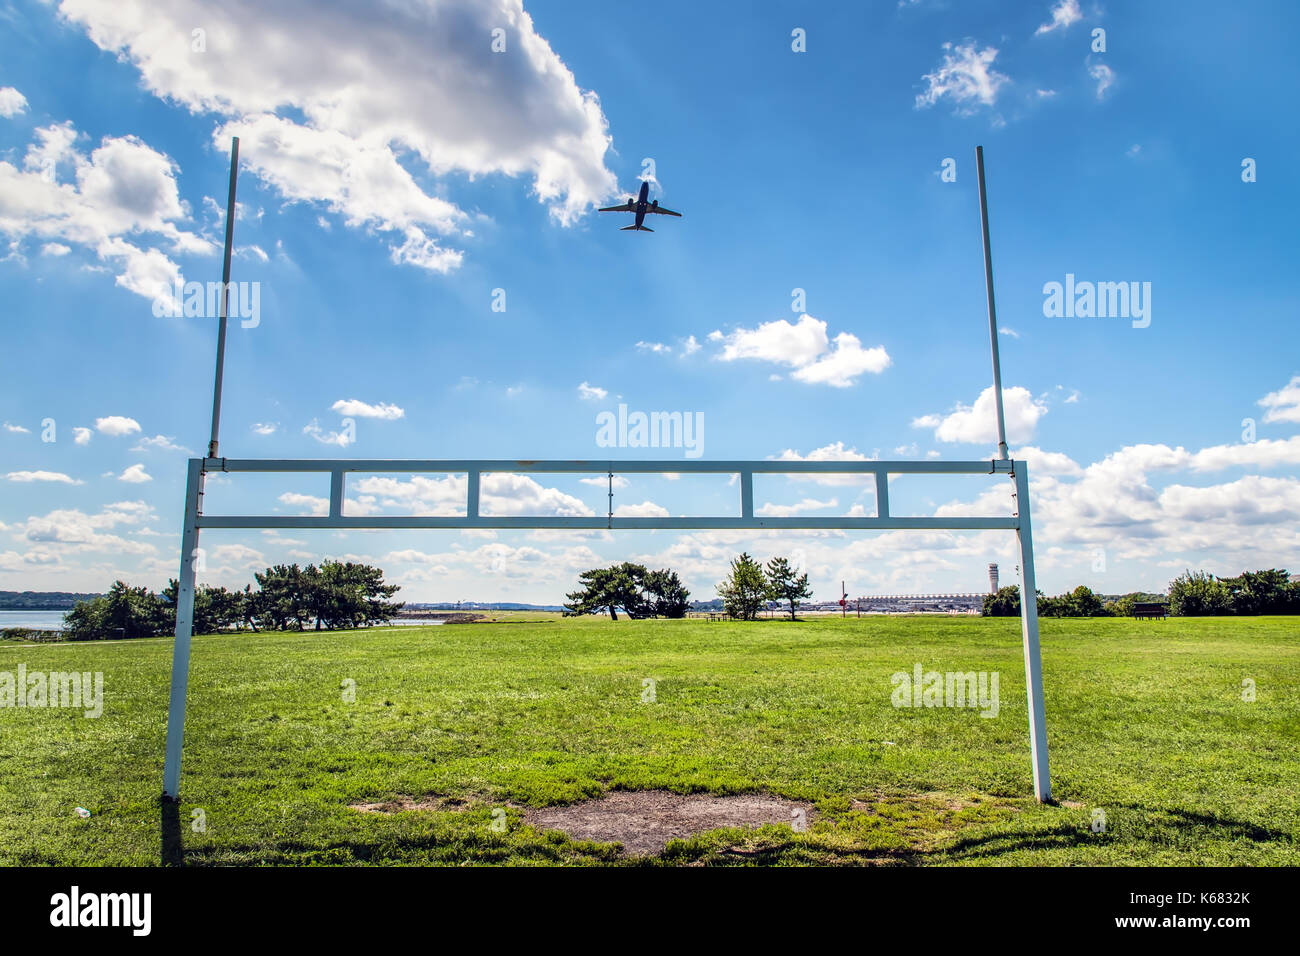 An airplane takes off over the football goal posts of a nearby ball park. Stock Photo